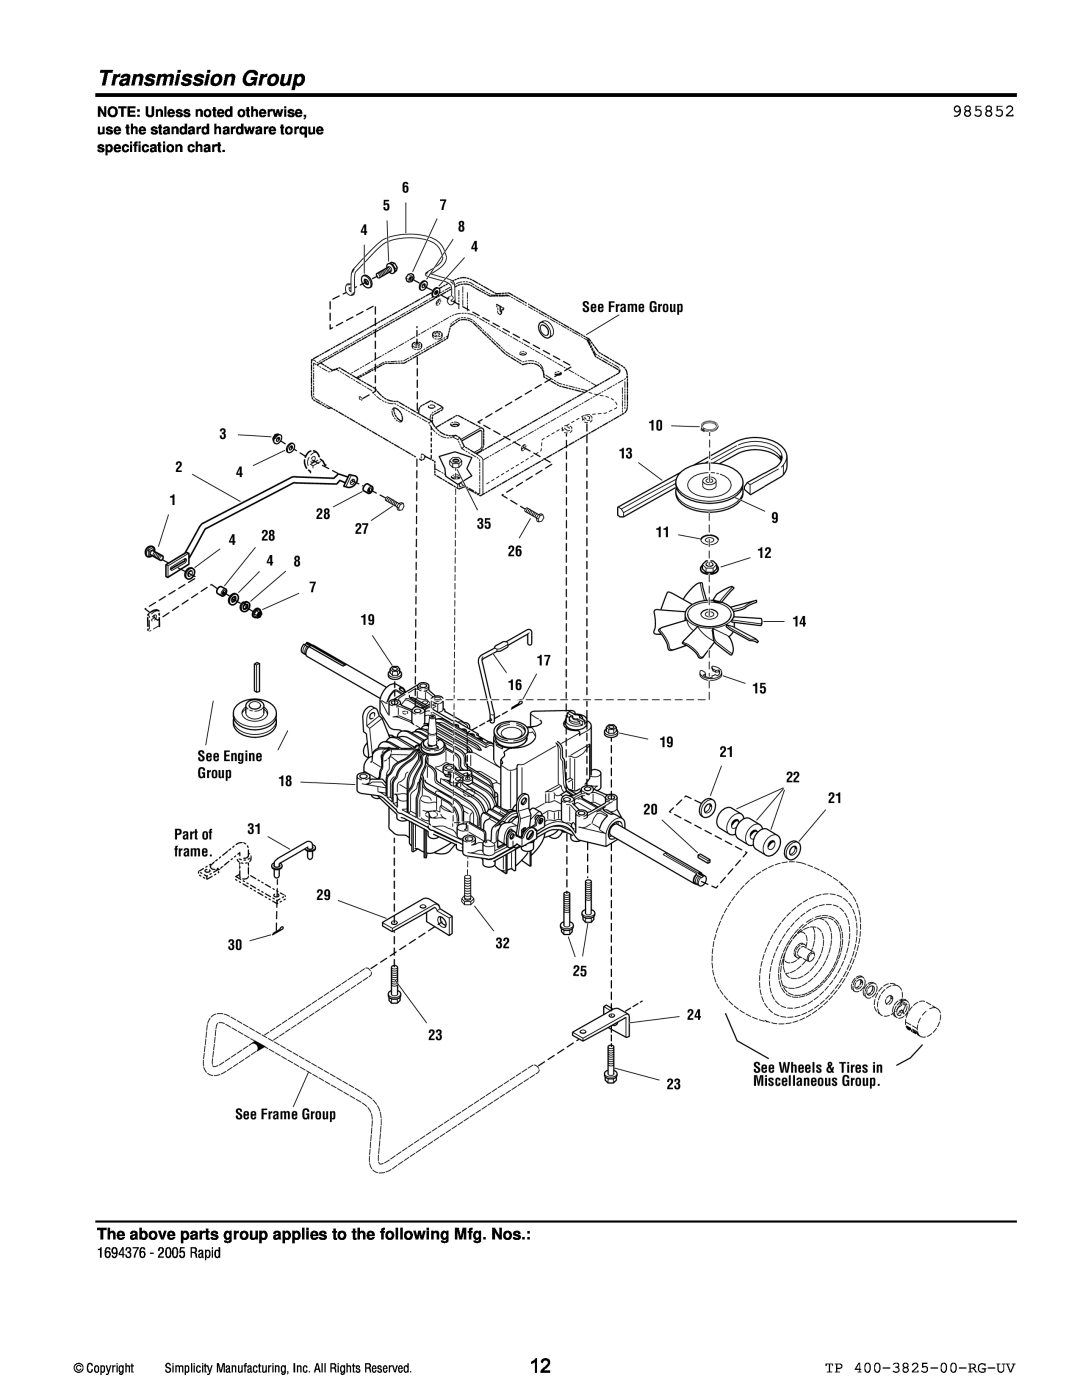 Simplicity 1694377 Transmission Group, 985852, The above parts group applies to the following Mfg. Nos, See Frame Group 